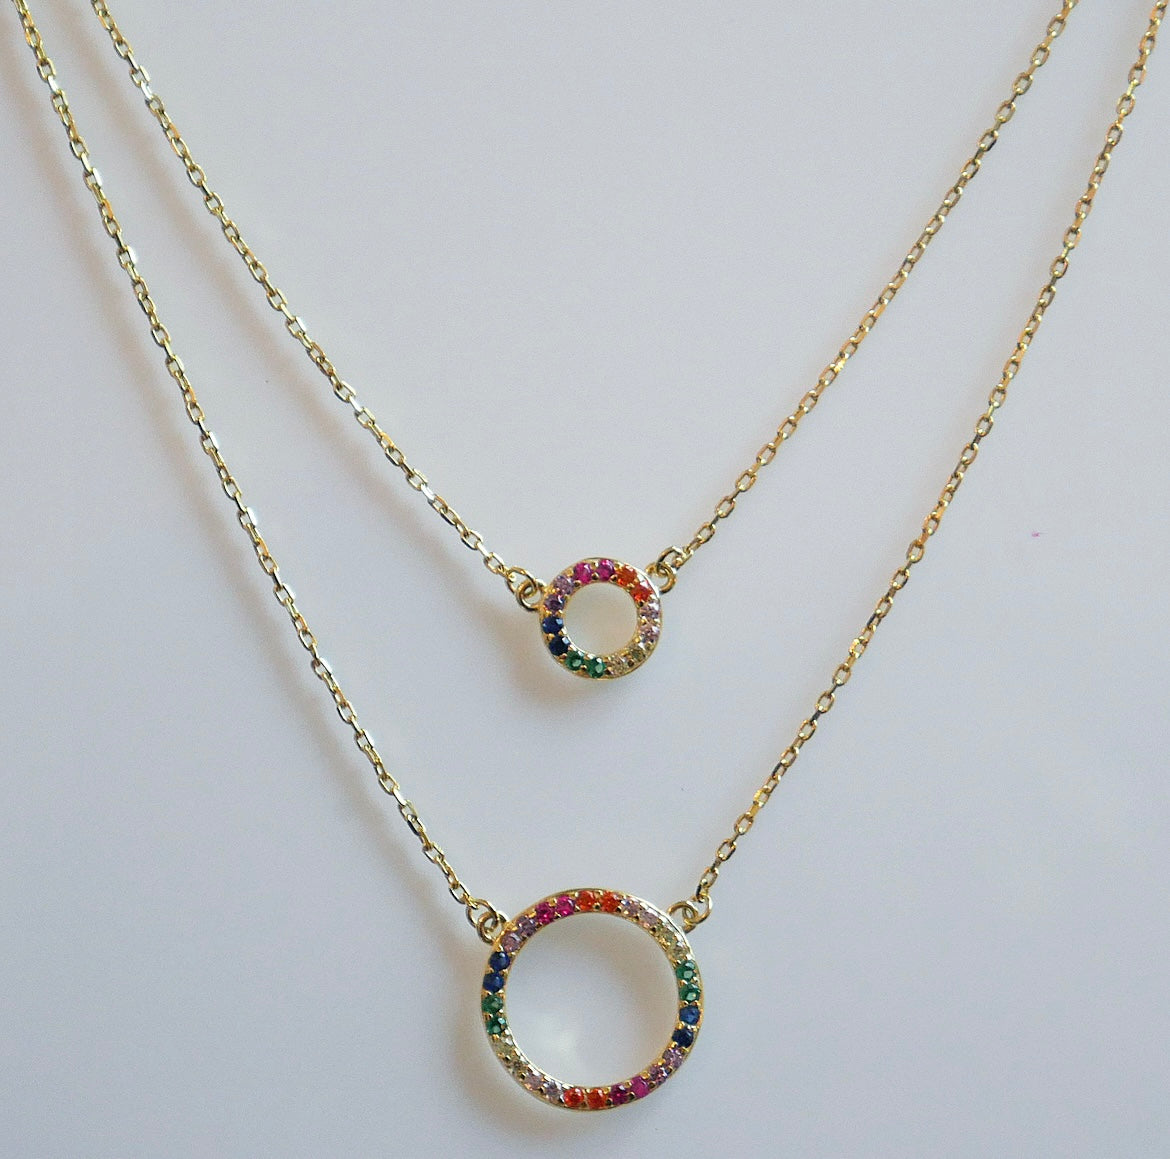 Fancy Day Wear Circle Layered Necklace